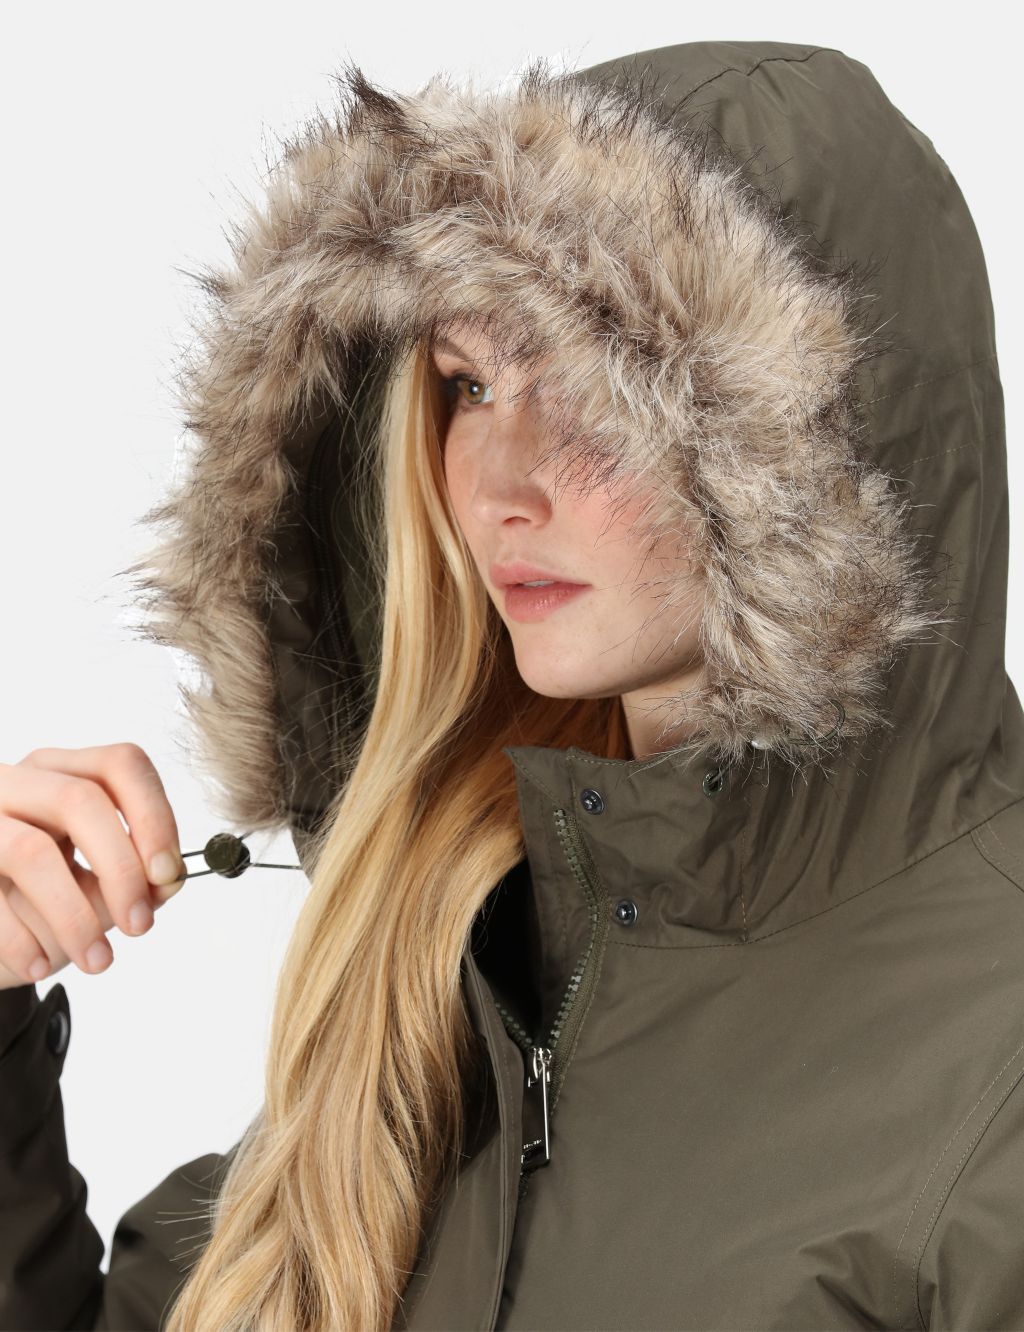 Waterproof Ski Jacket With Removable Hood And Faux-fur Trim